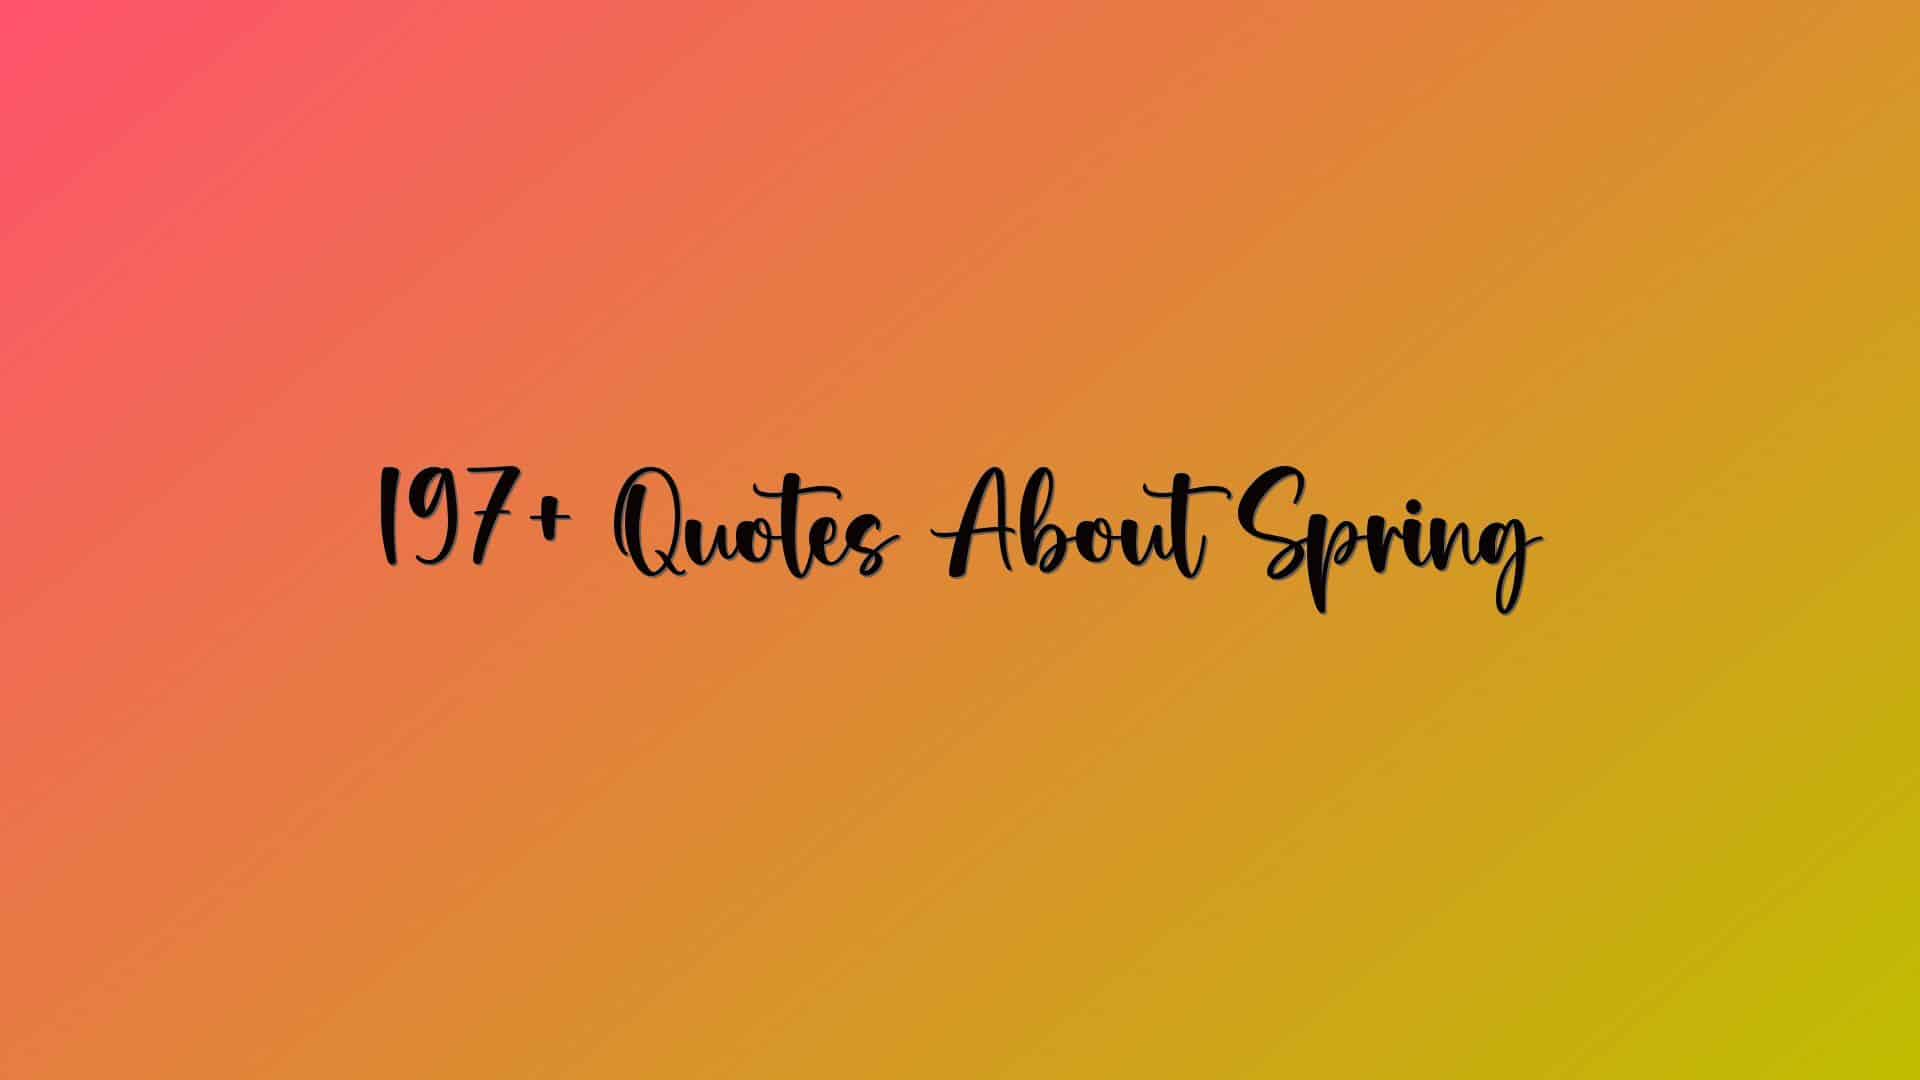 197+ Quotes About Spring